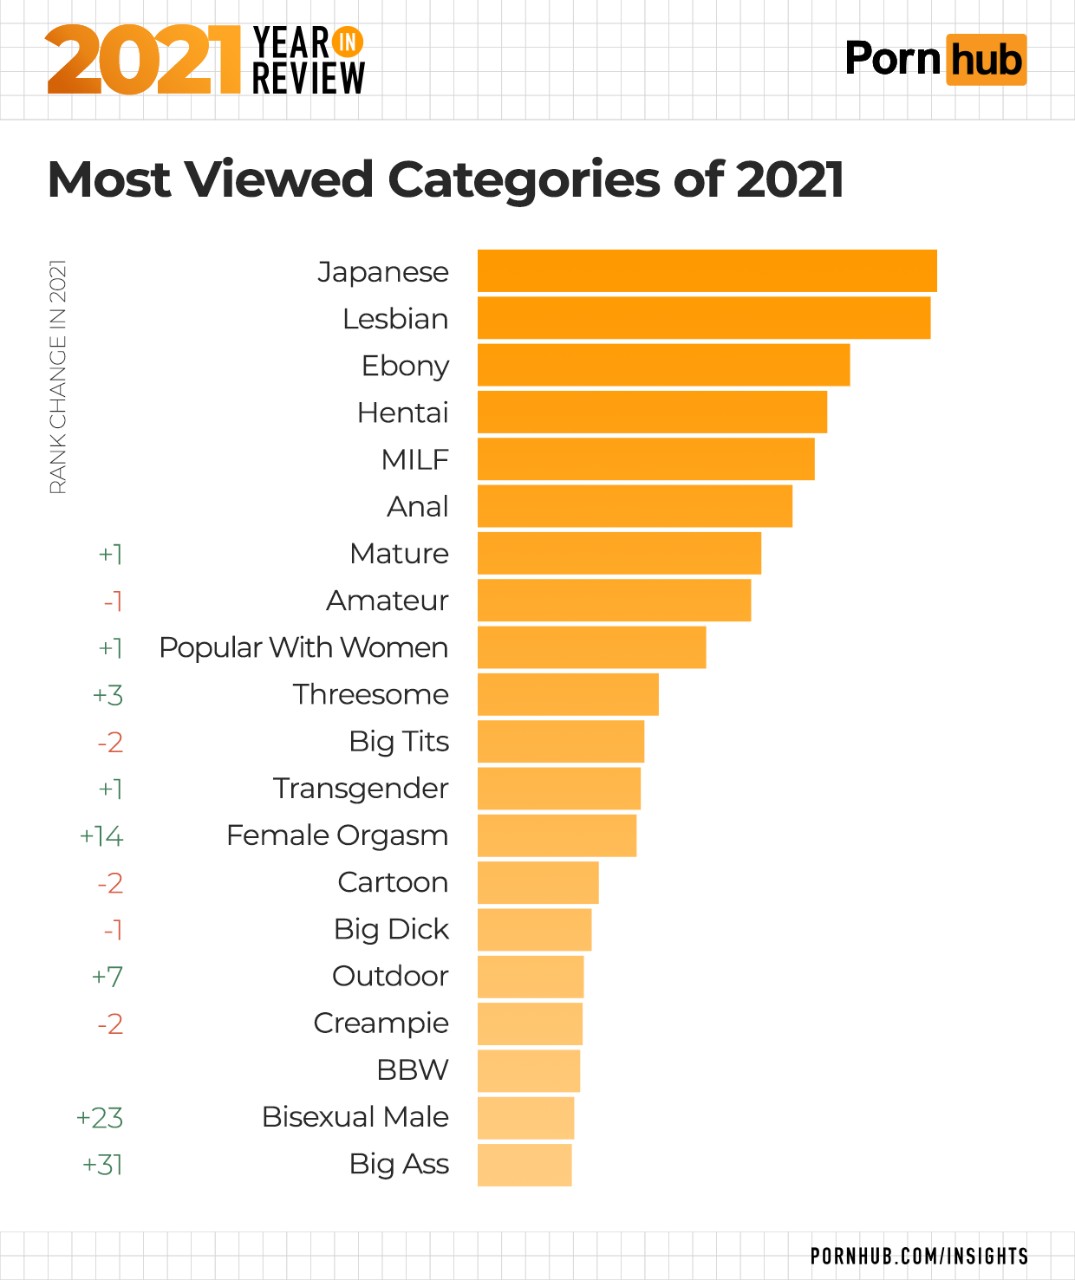 1-pornhub-insights-2021-year-in-review-most-viewed-categories